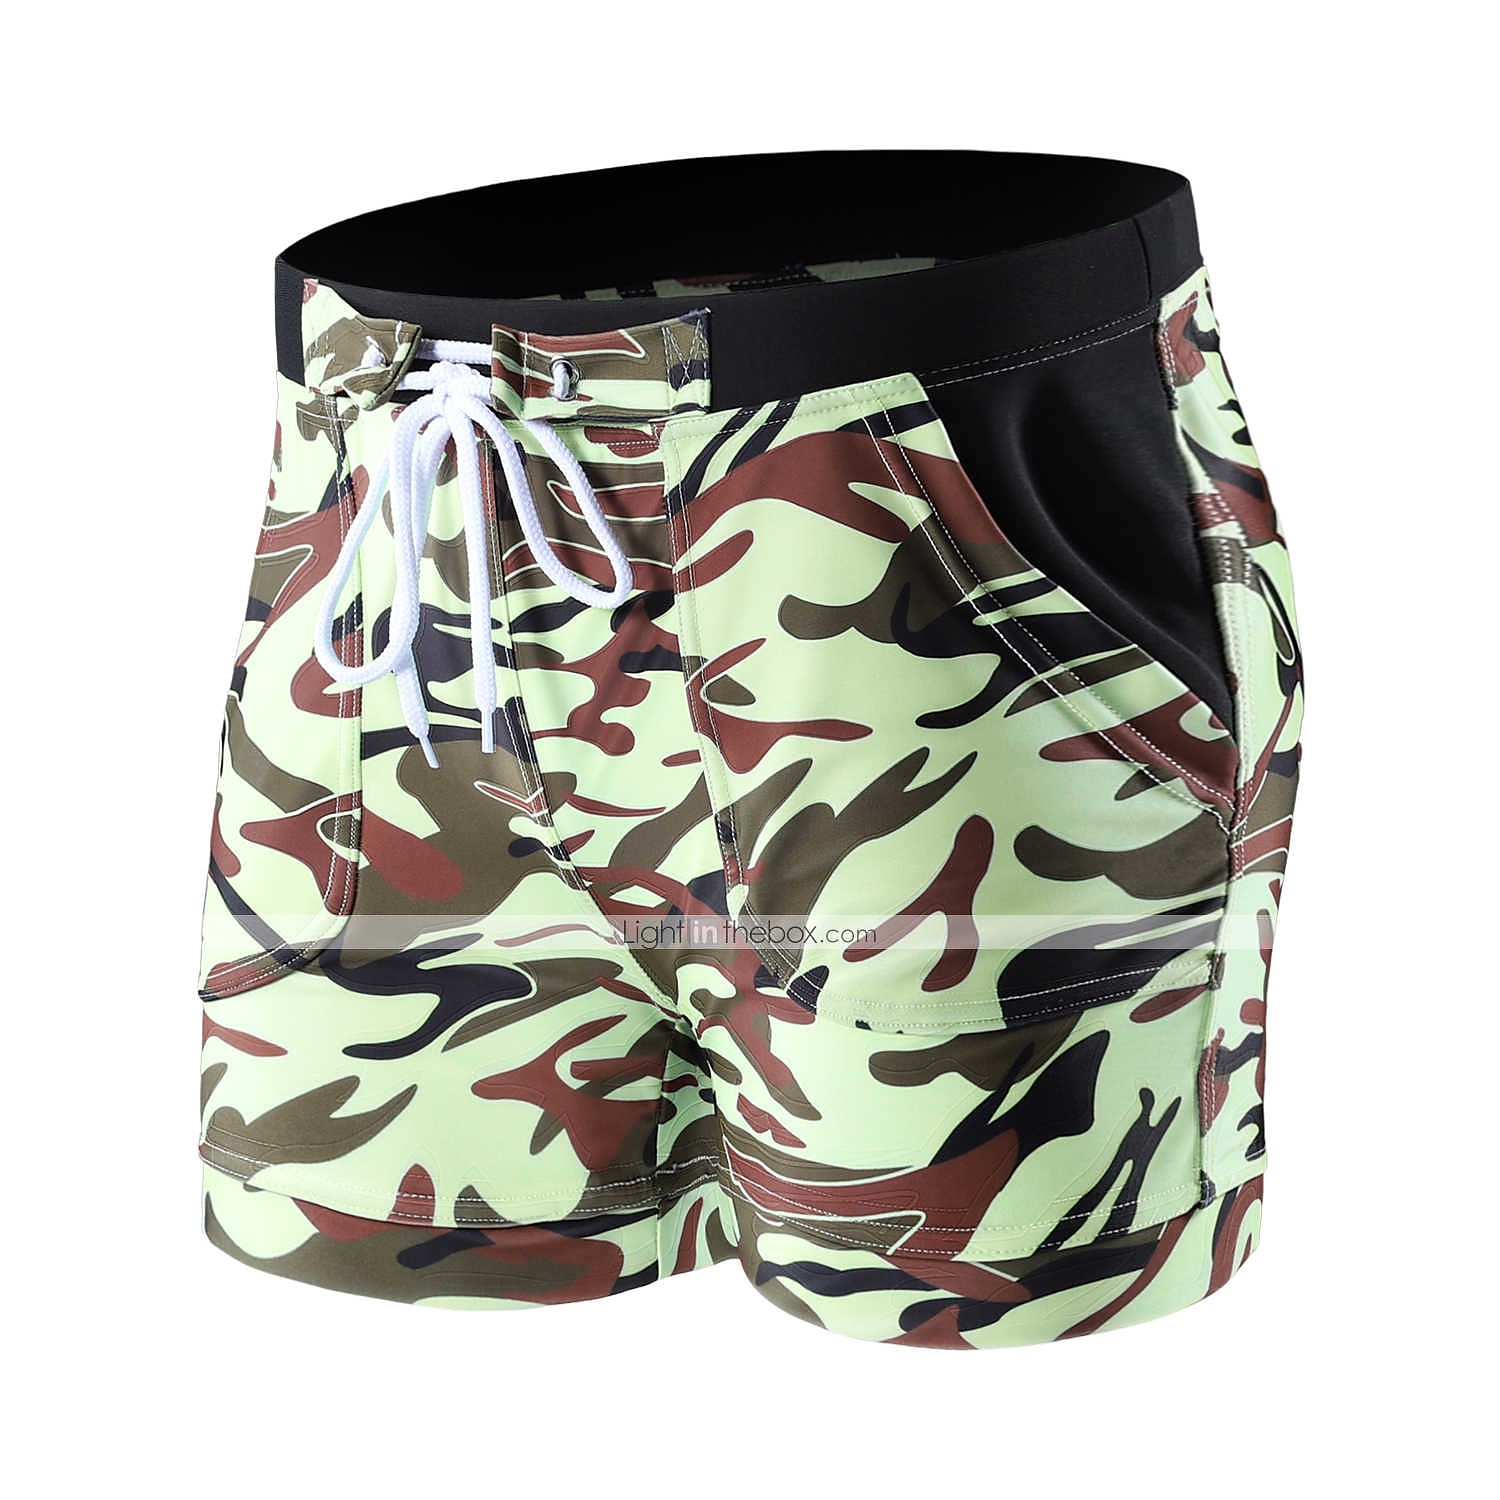 Wexzss Black and White Camouflage Funny Summer Quick-Drying Swim Trunks Beach Shorts Cargo Shorts